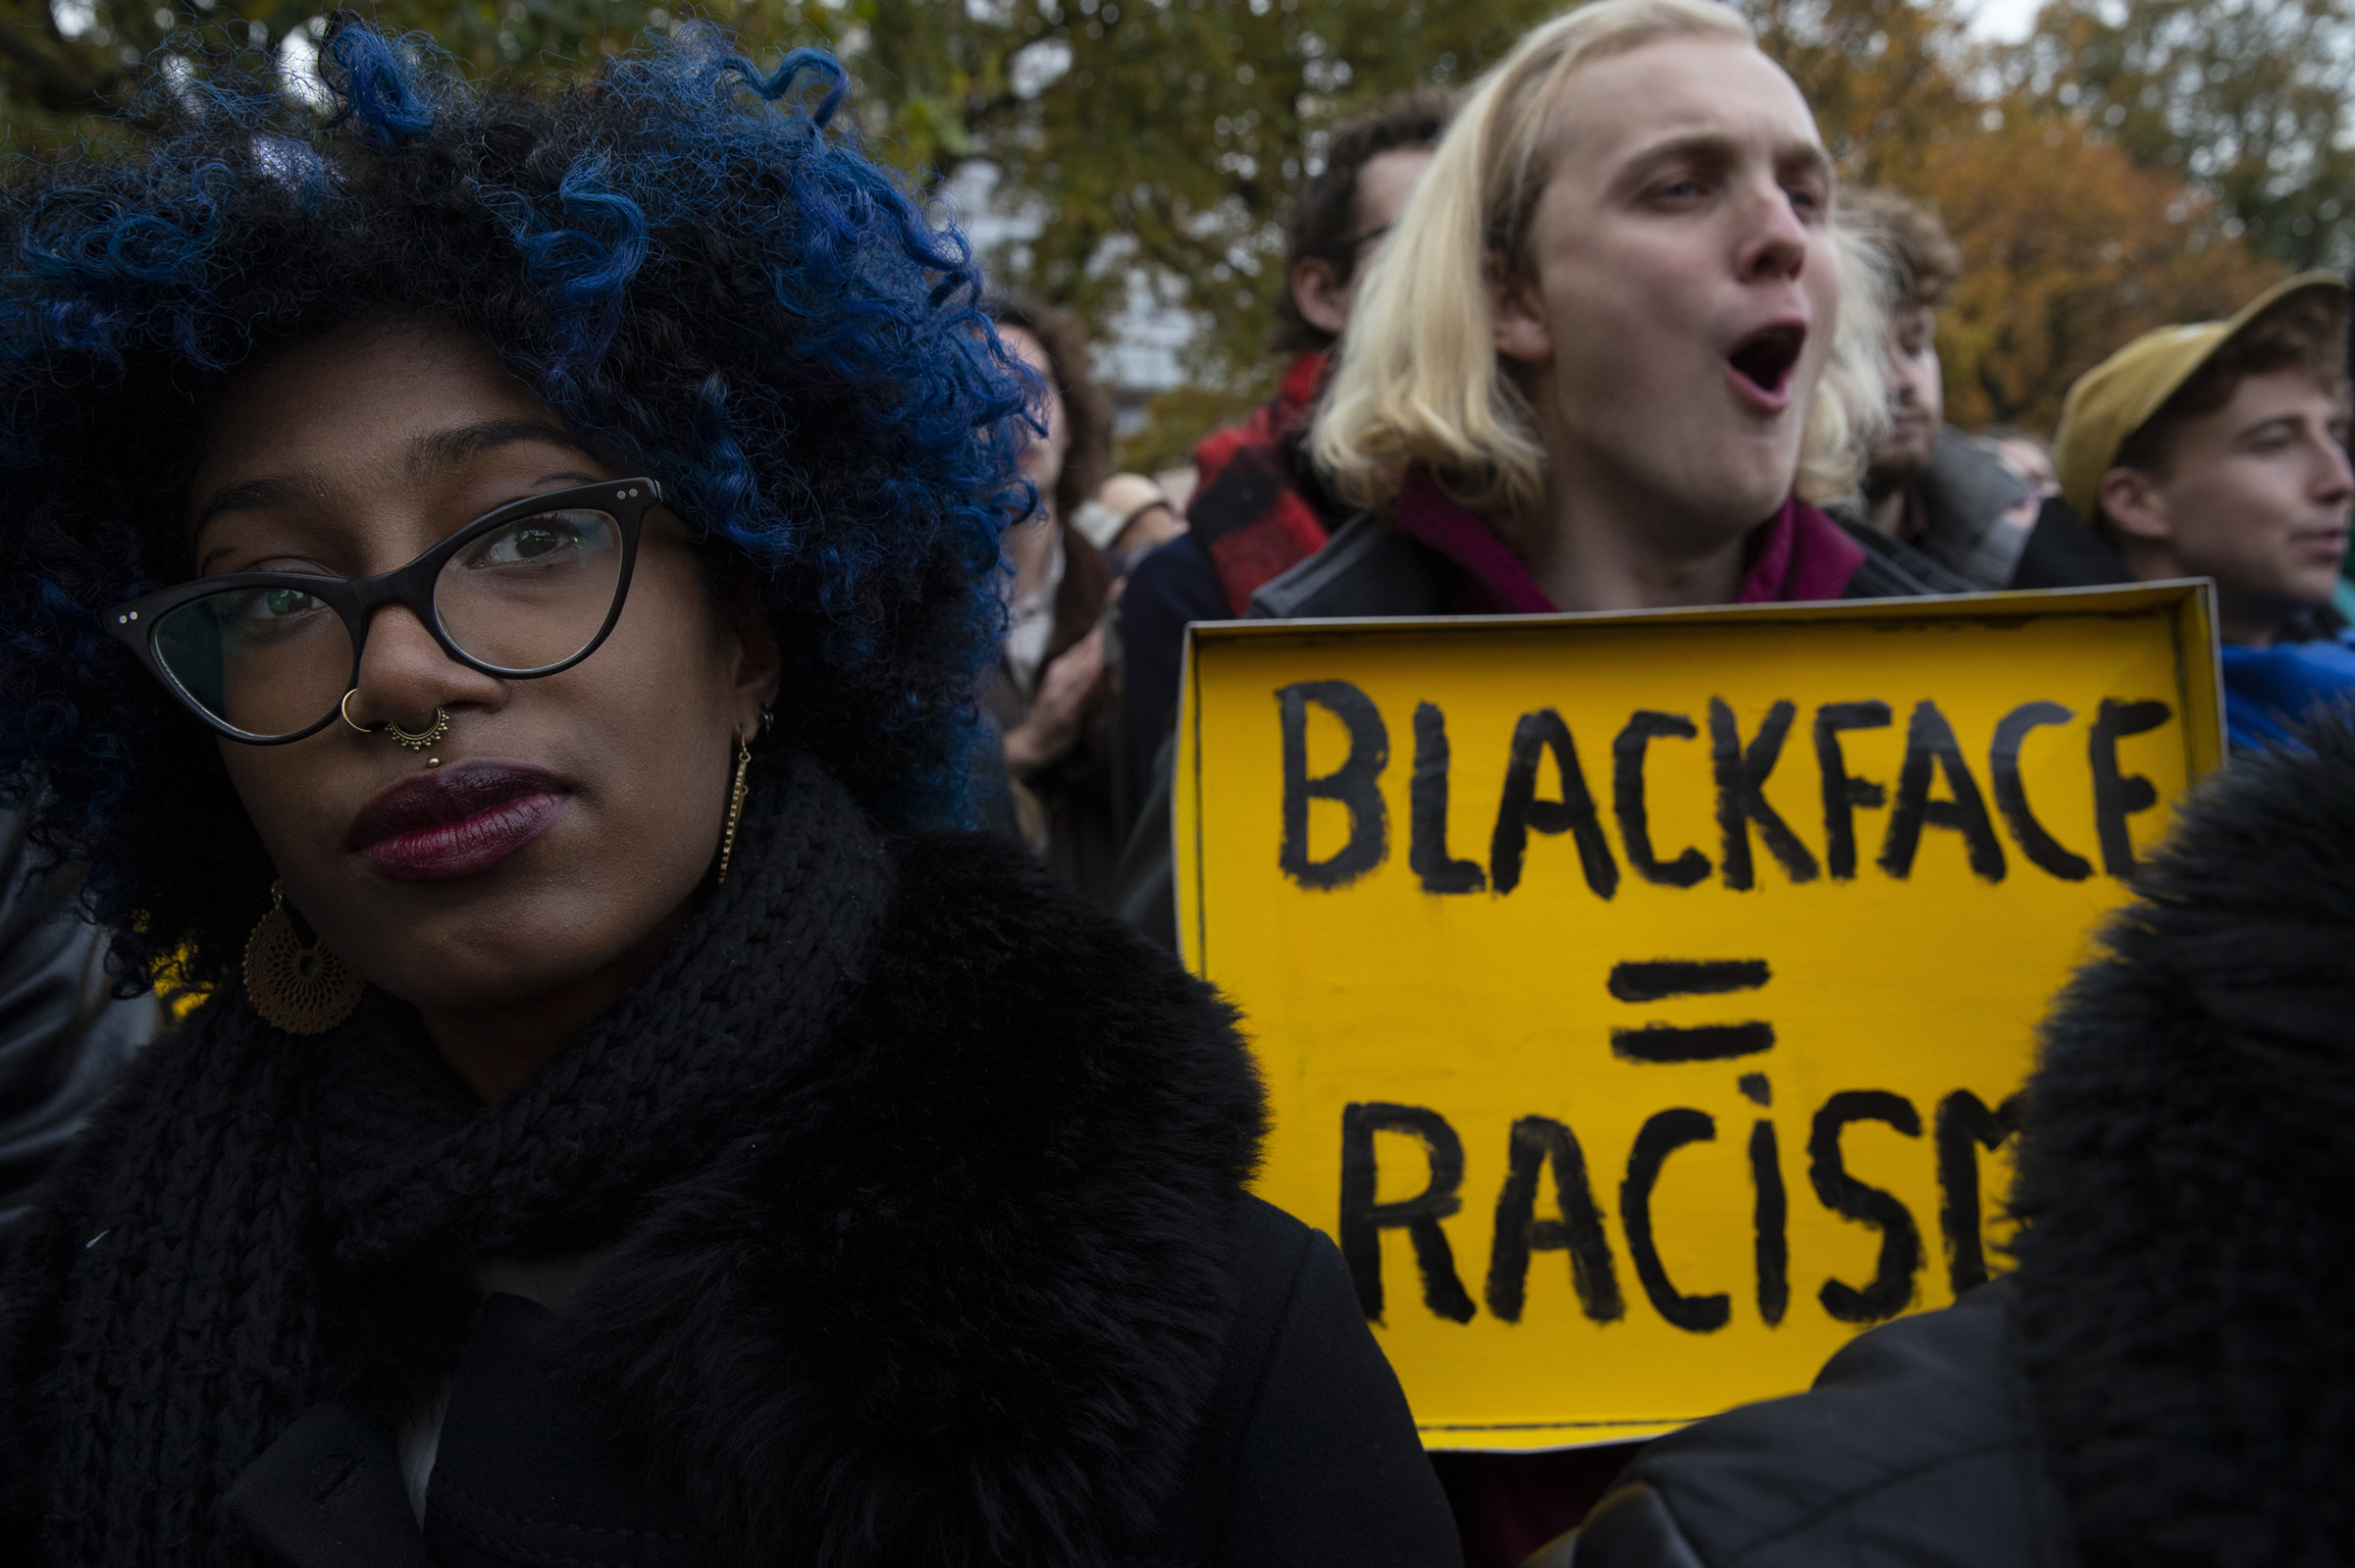 Kick Out Zwarte Piet, or Kick Out Black Pete demonstrators listen to speakers during a gathering in The Hague, Netherlands, on Nov. 16, 2019. (Peter Dejong—AP)